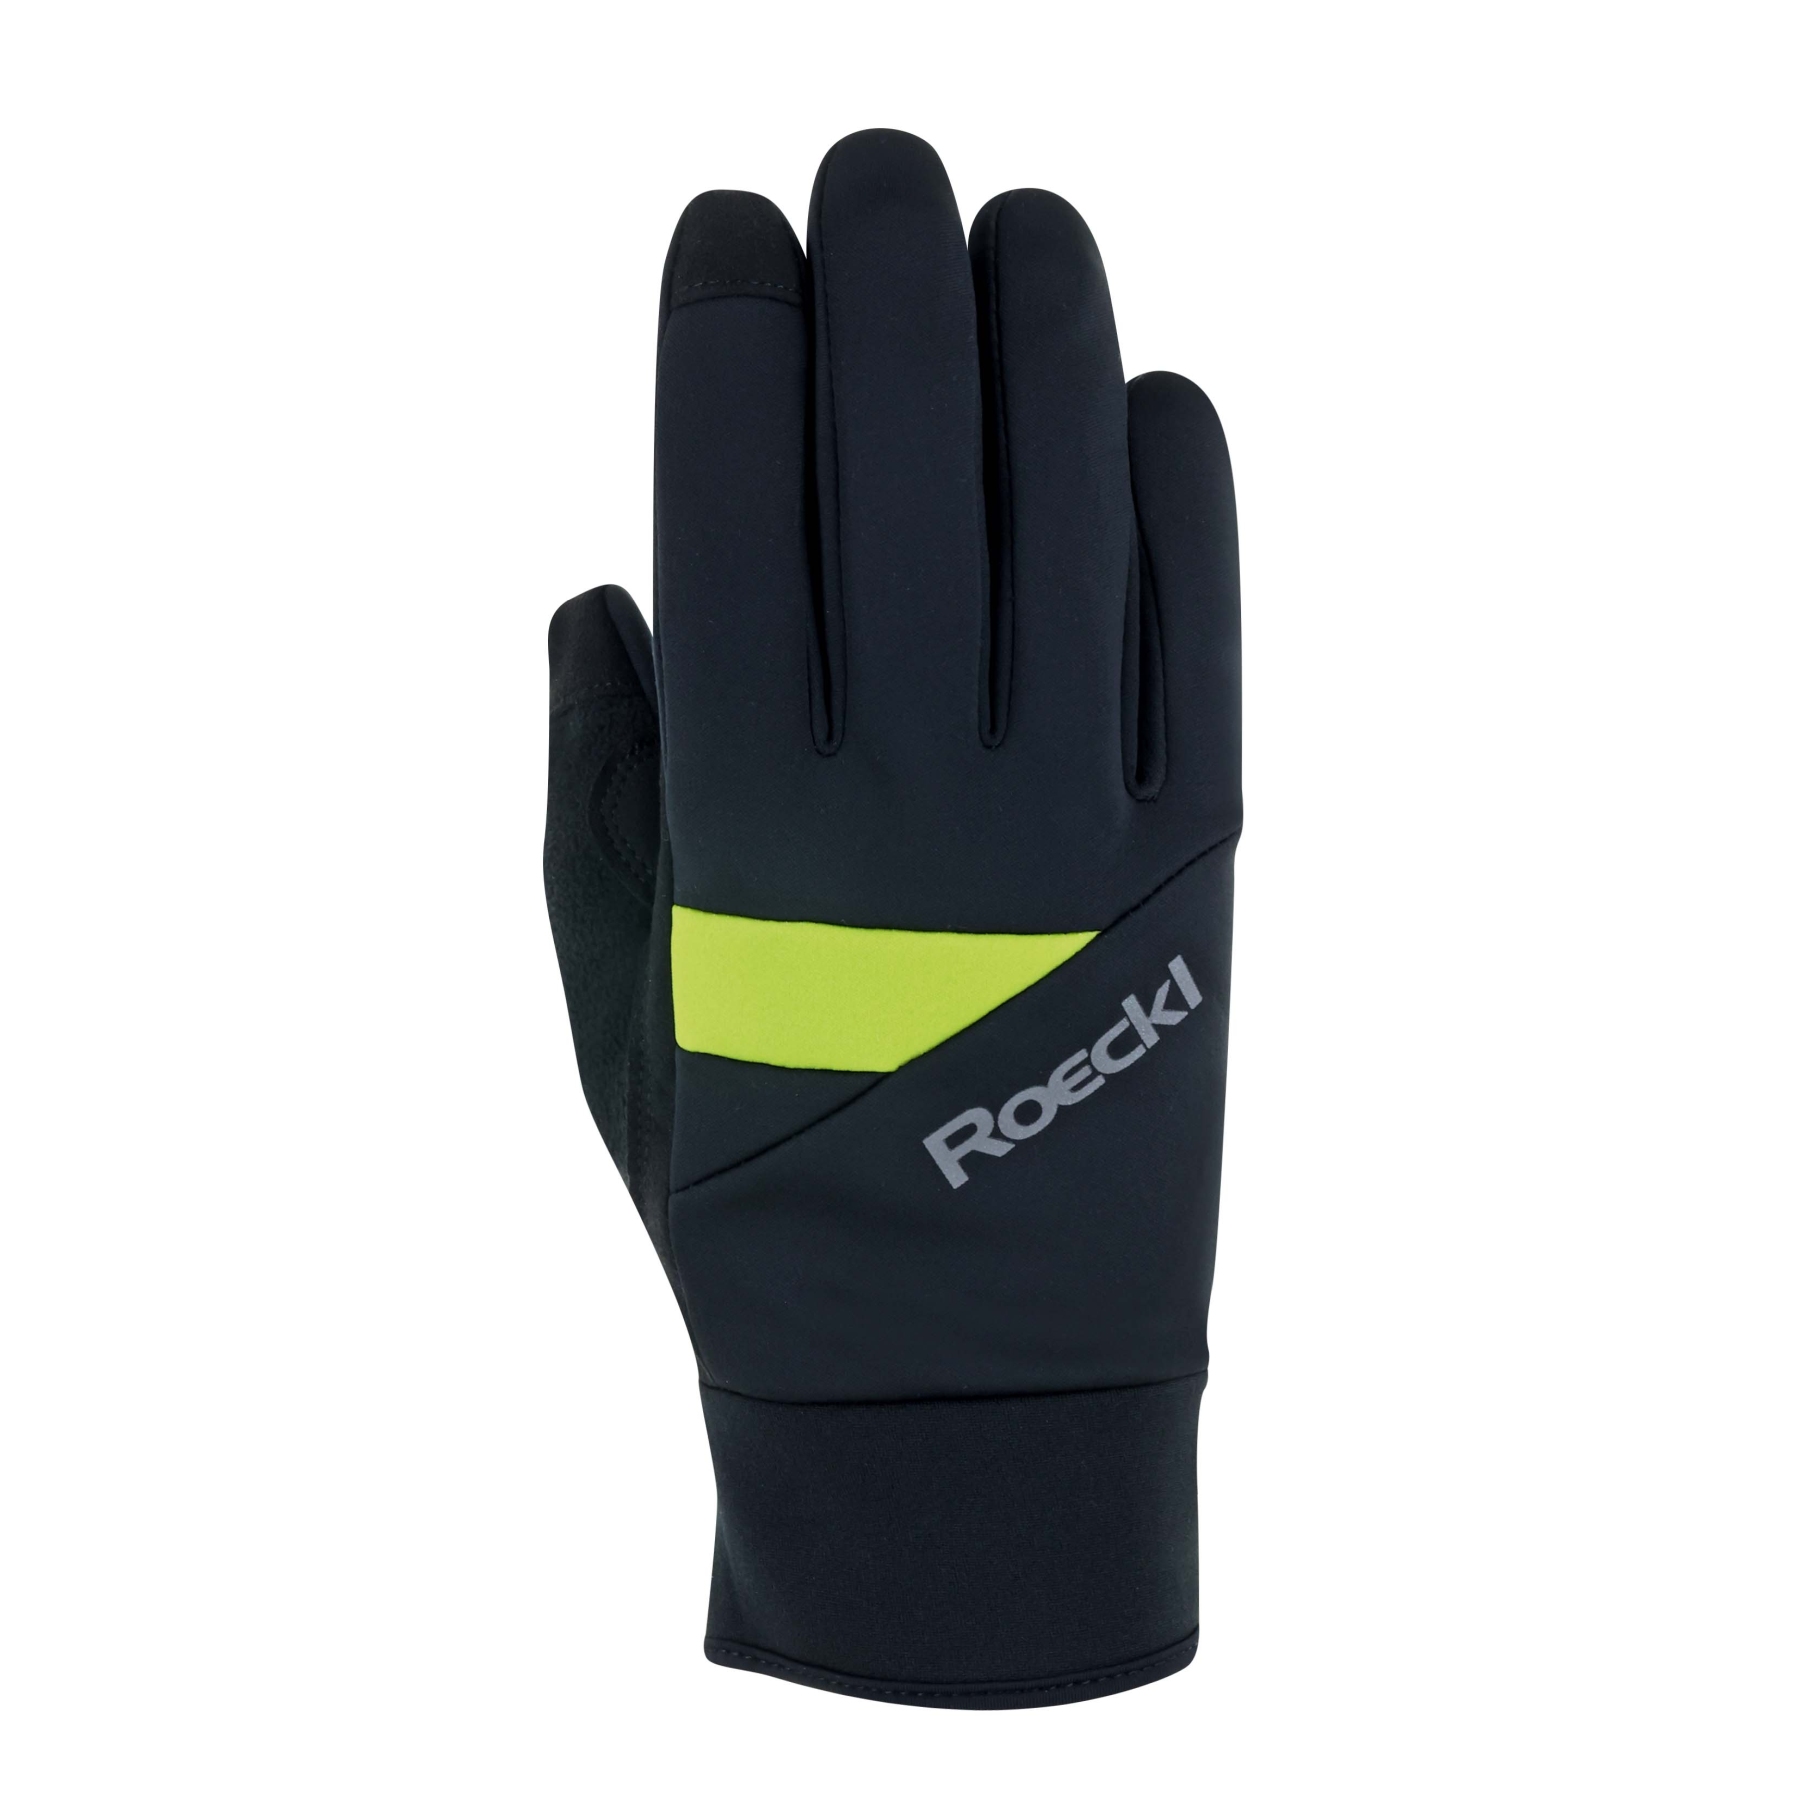 Picture of Roeckl Sports Reichenthal Cycling Gloves - black/sulphur spring 9211